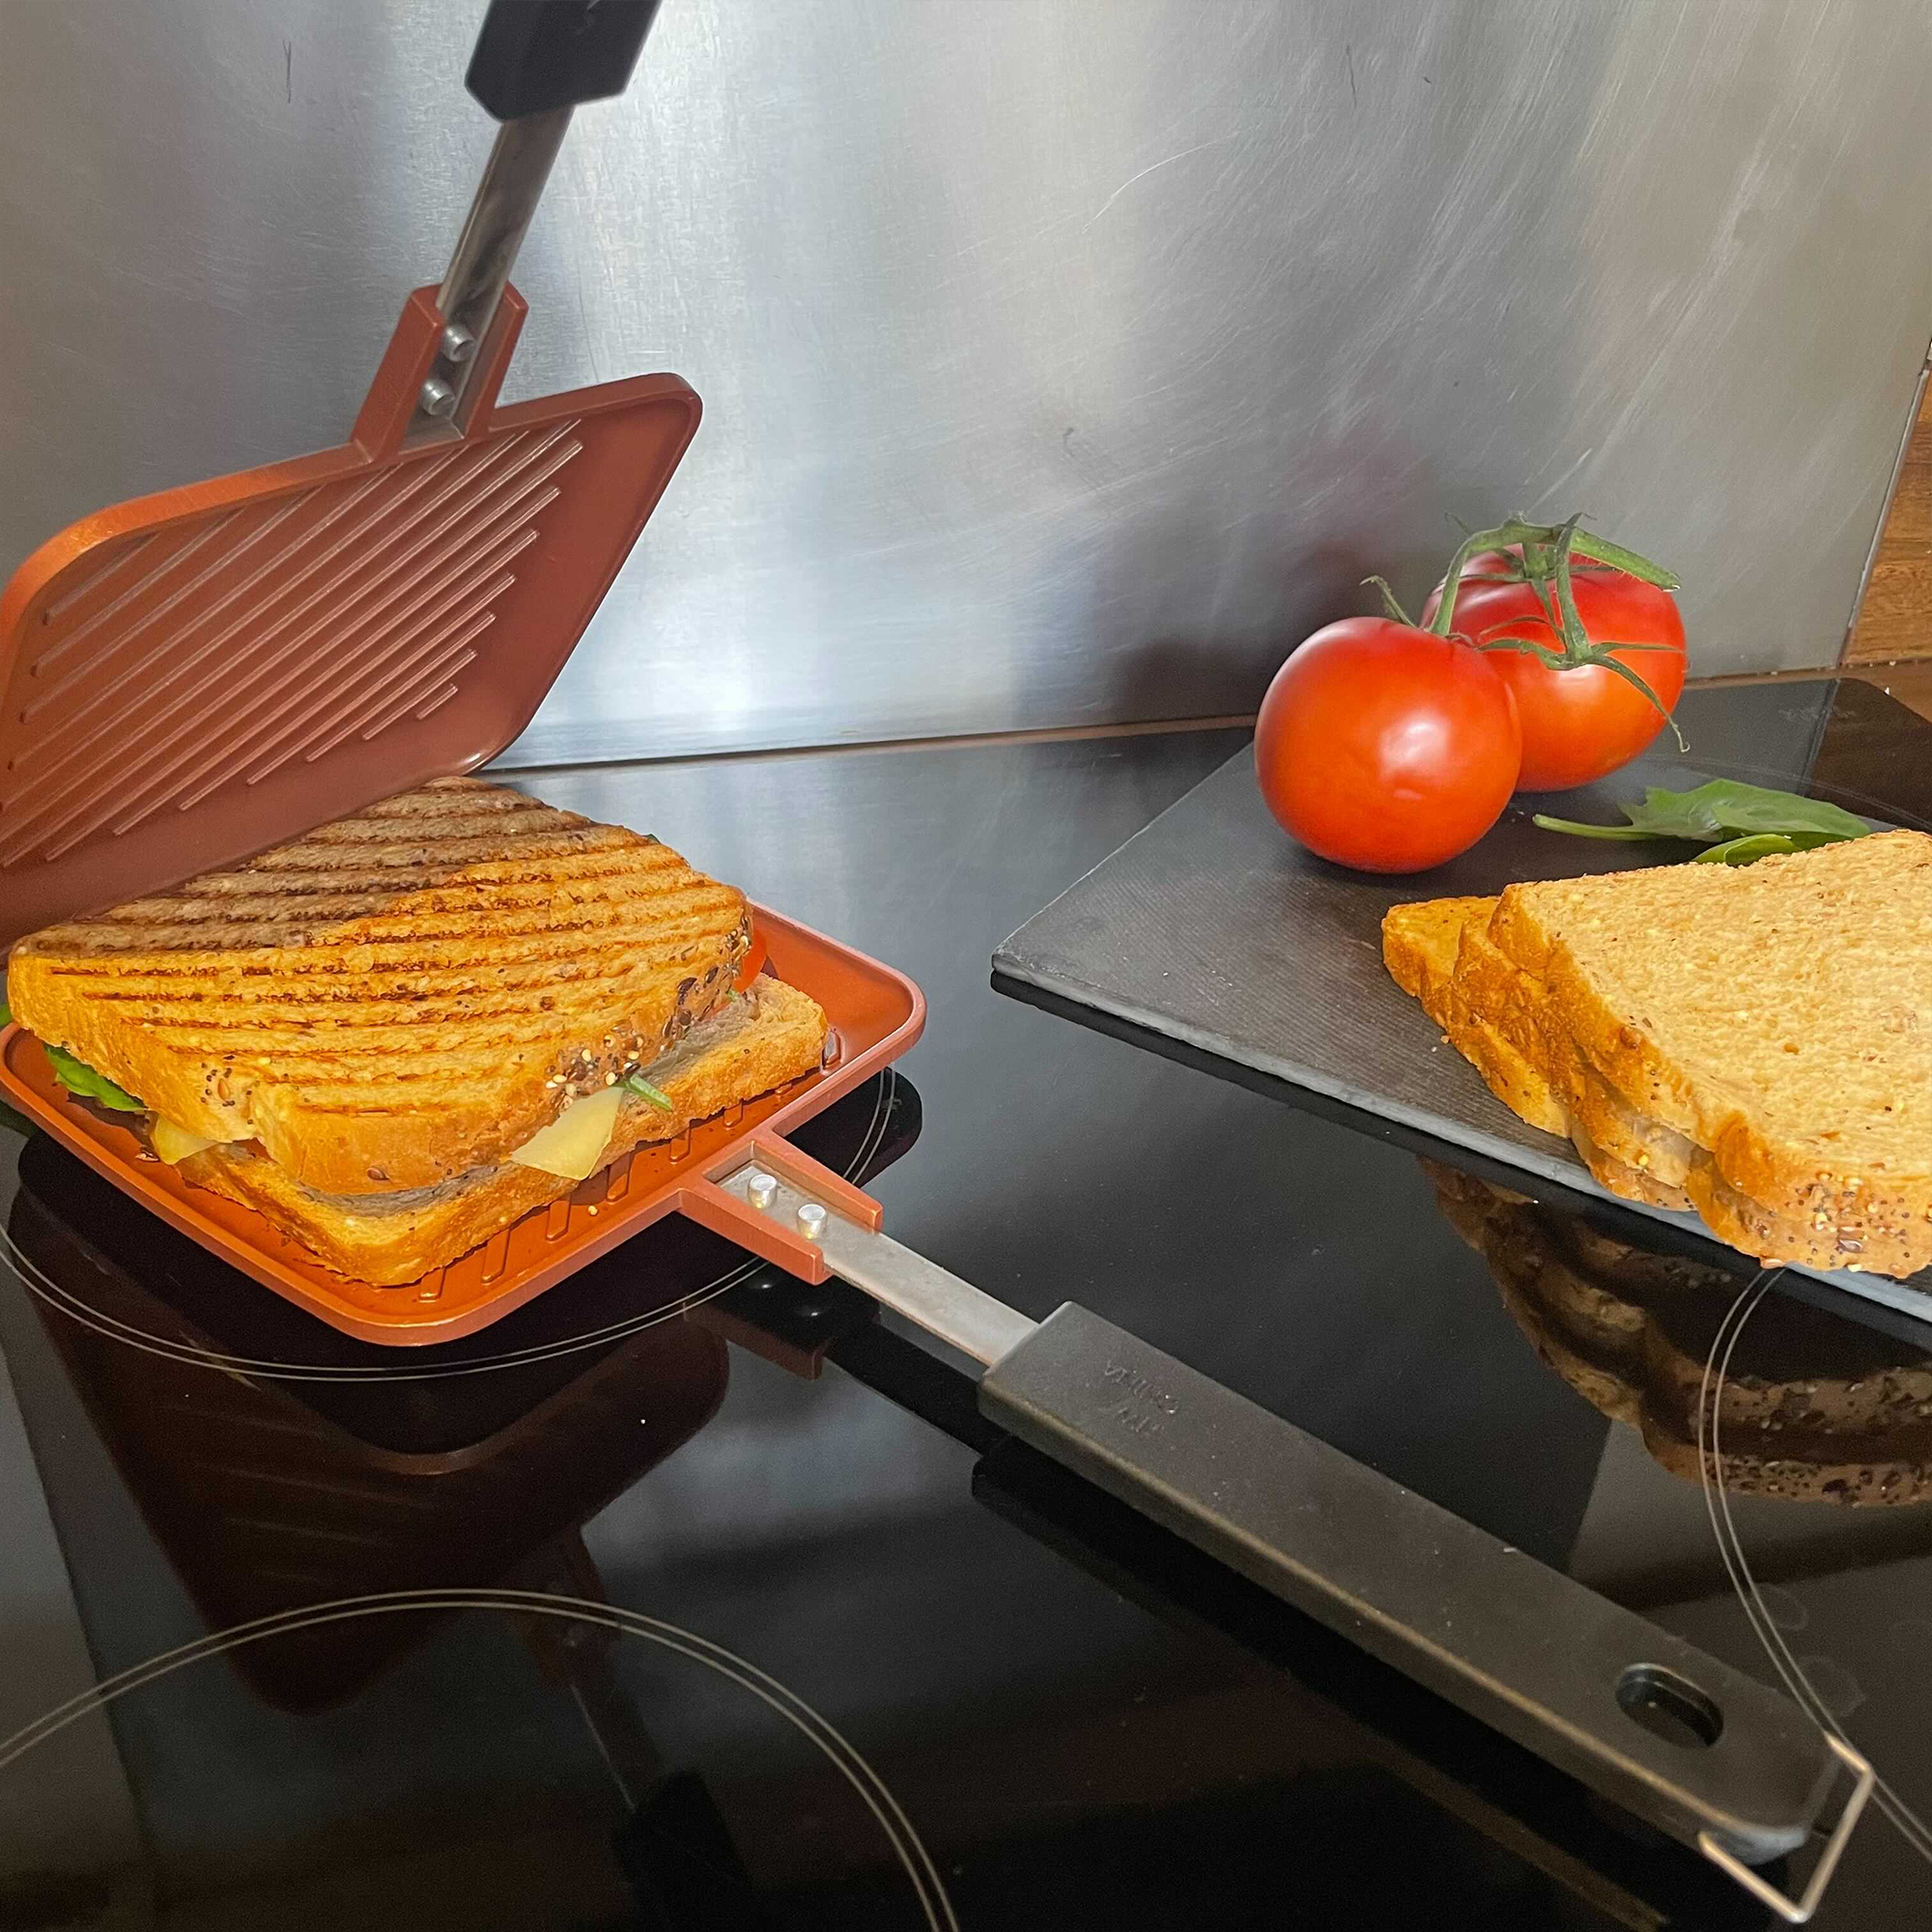 Breakfast Sandwich Maker Grill Press, Grilled Cheese Maker Panini Press  Sandwich Toaster Presser - Stove Top Nonstick by Jean Patrique (Silver)